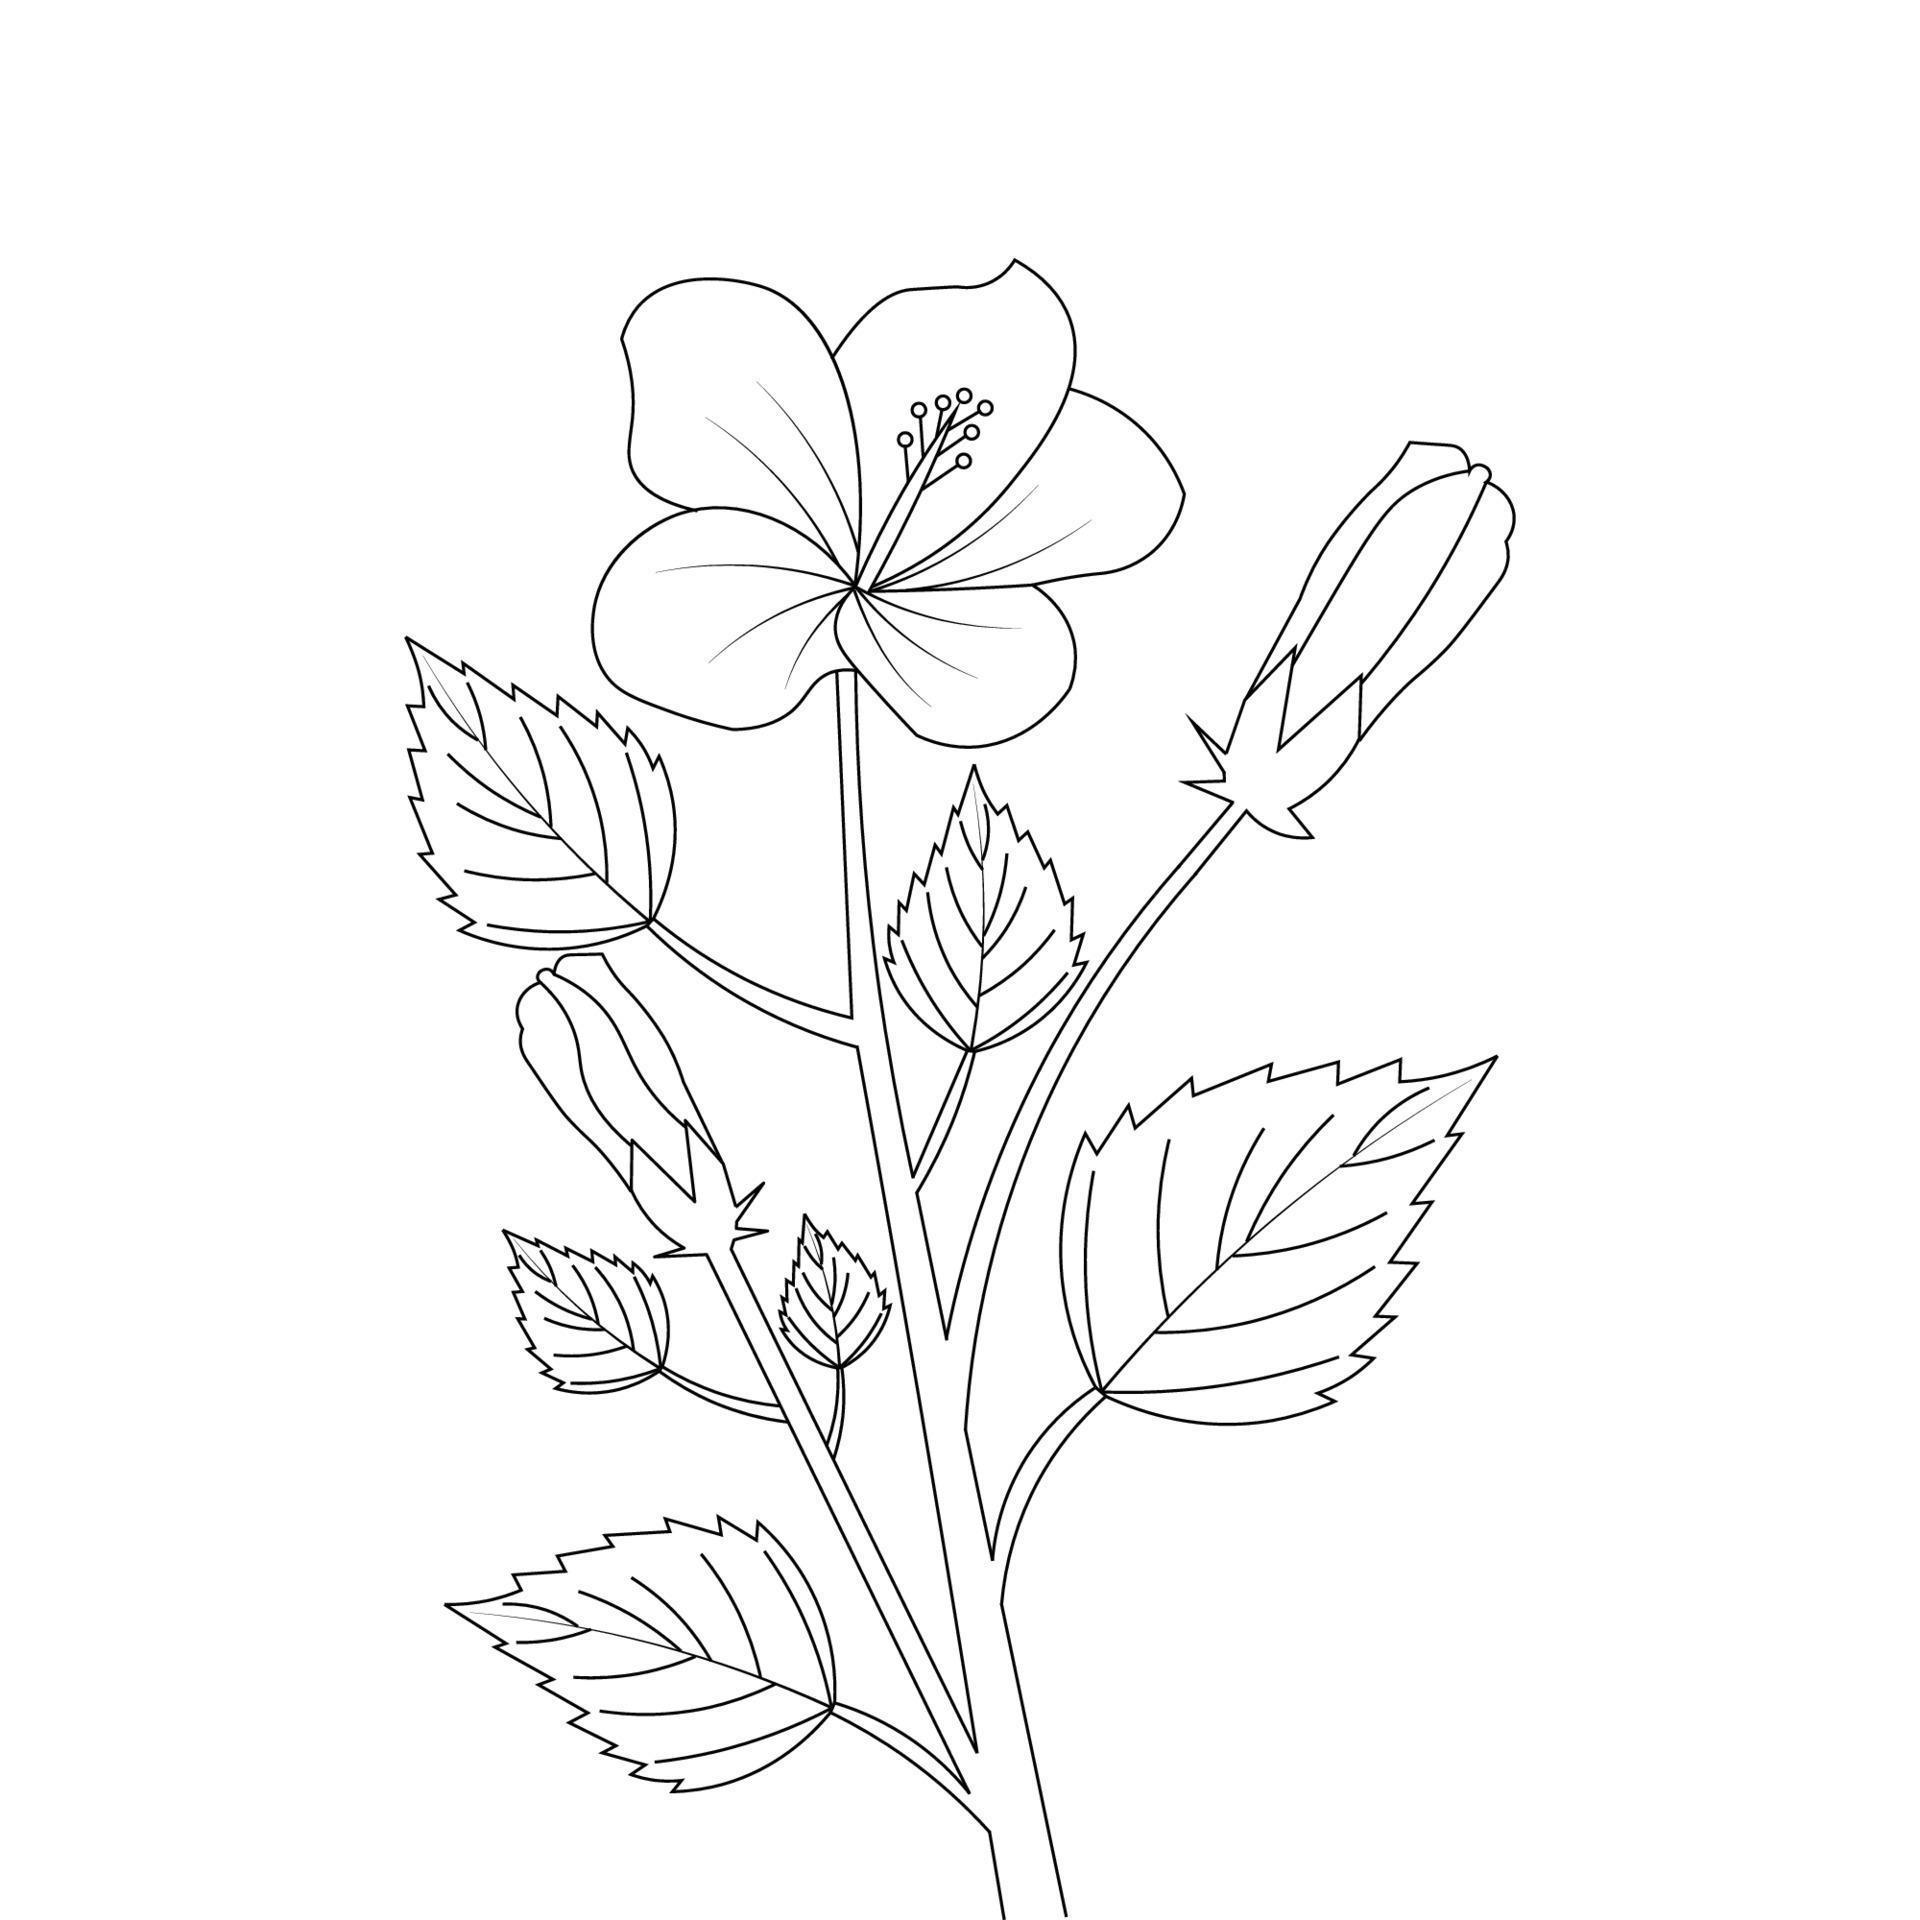 kids coloring page of hibiscus flower illustration with line art stroke ...